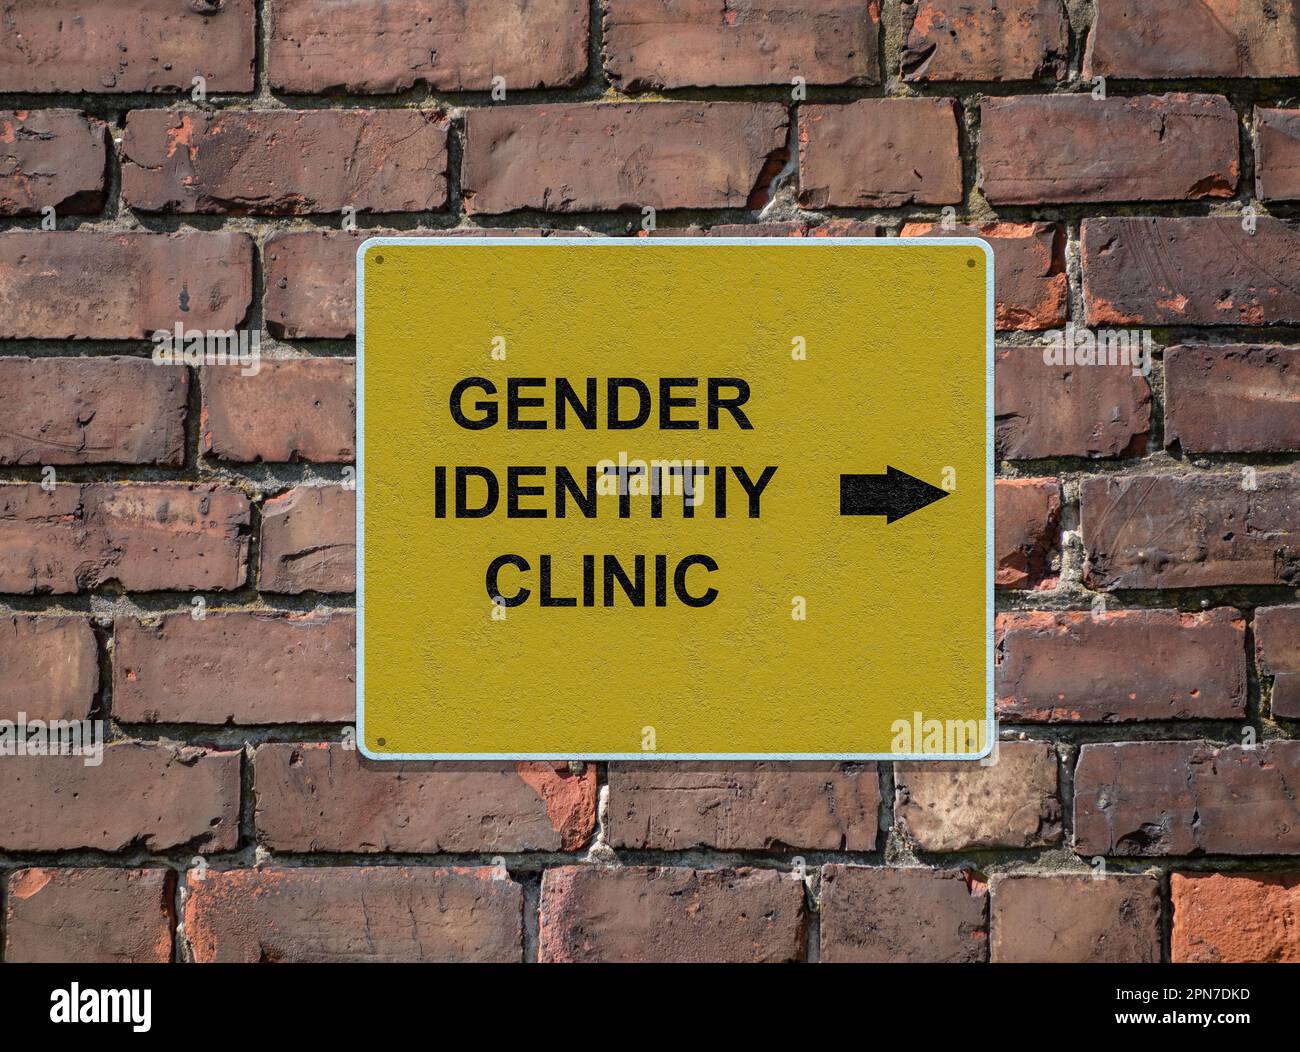 Gender identity clinic sign. Stock Photo